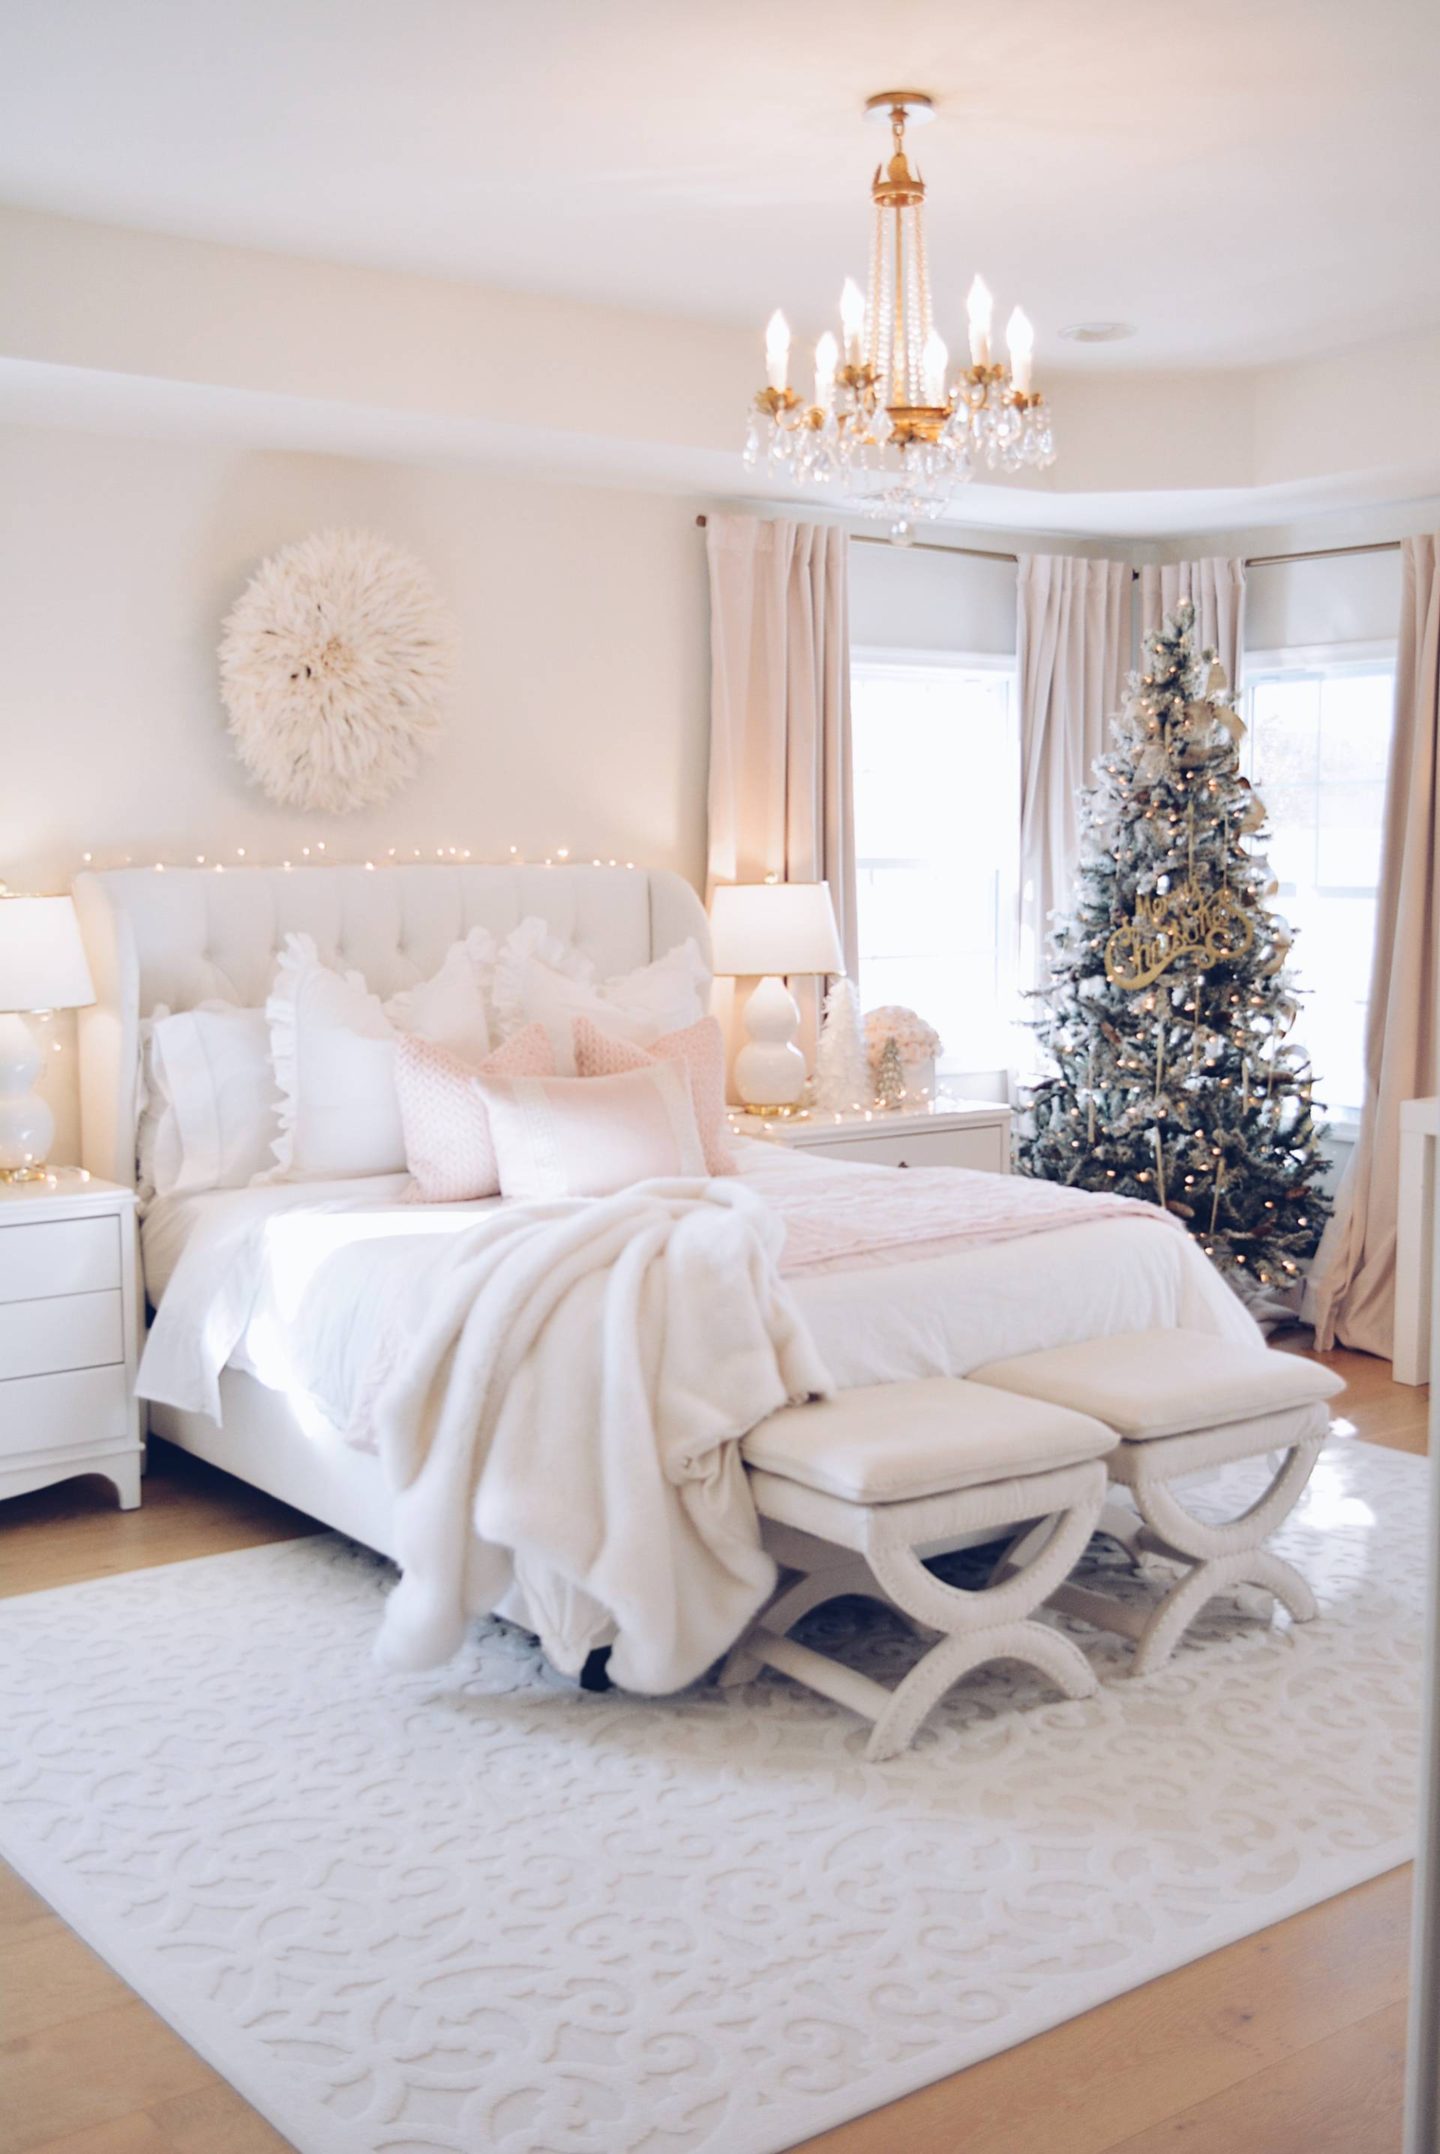 A Christmas bedroom with Gap Home for Walmart